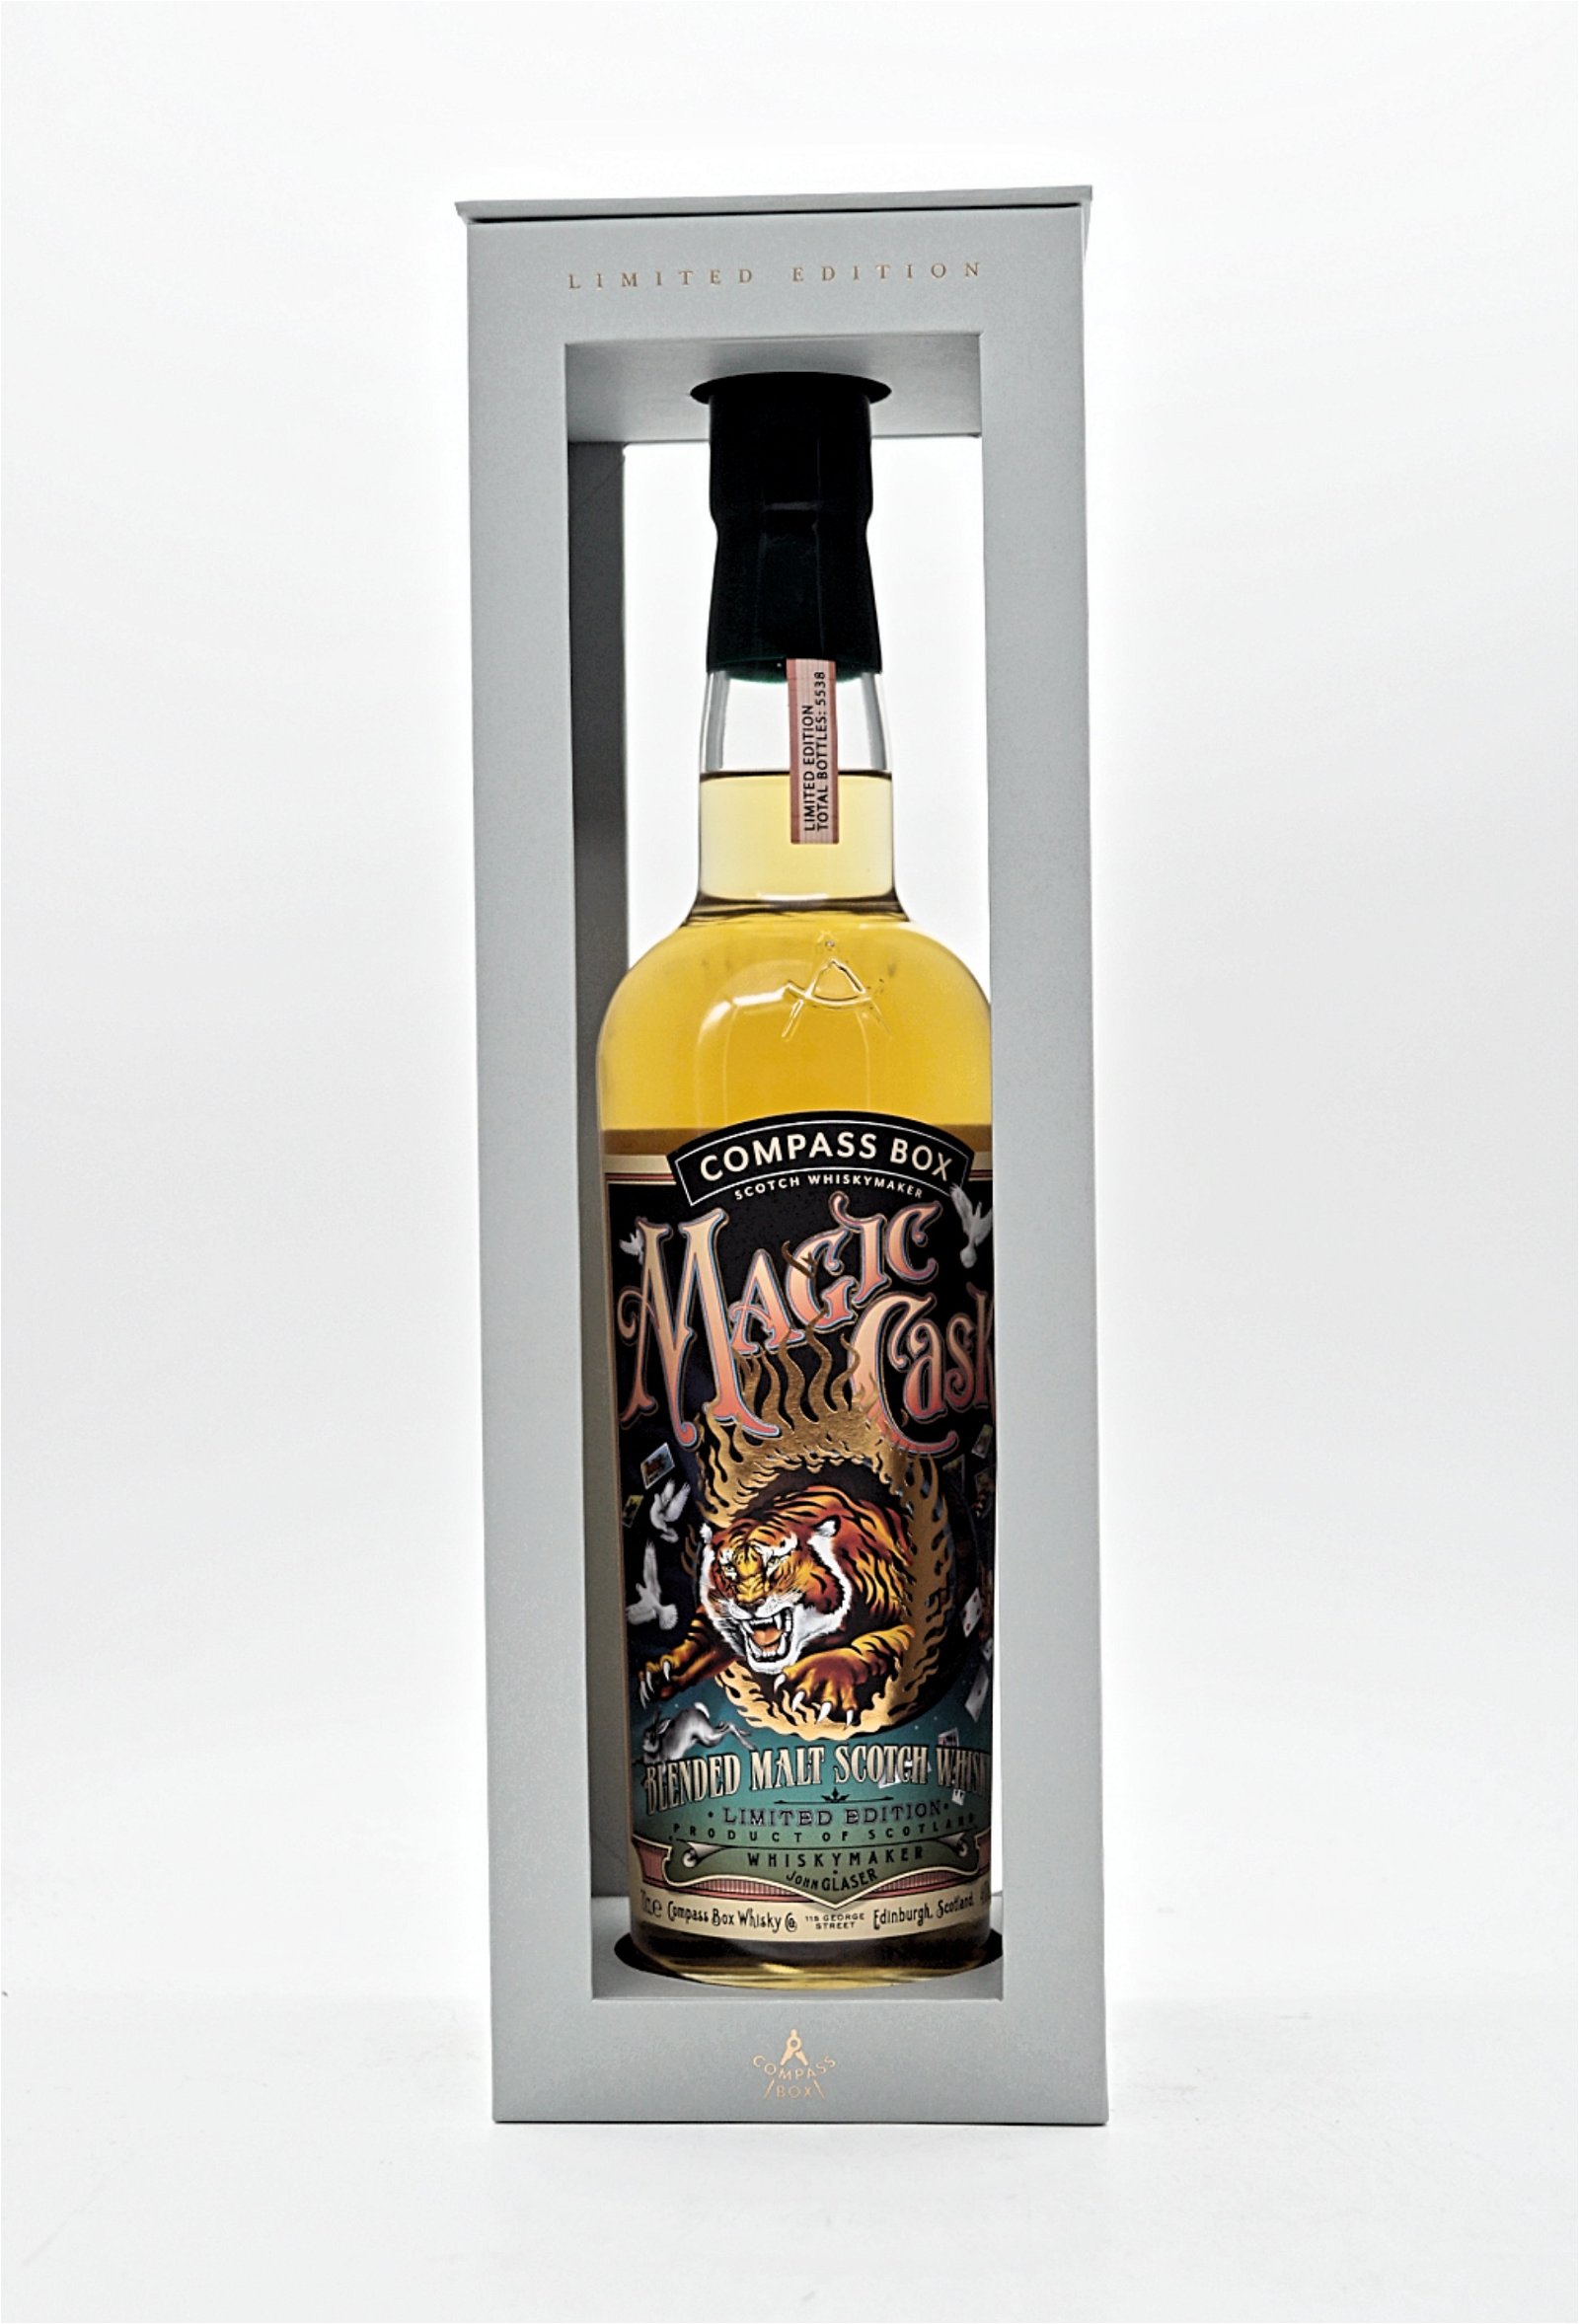 Compass Box Magic Cask Limited Edition Blended Malt Scotch Whisky 